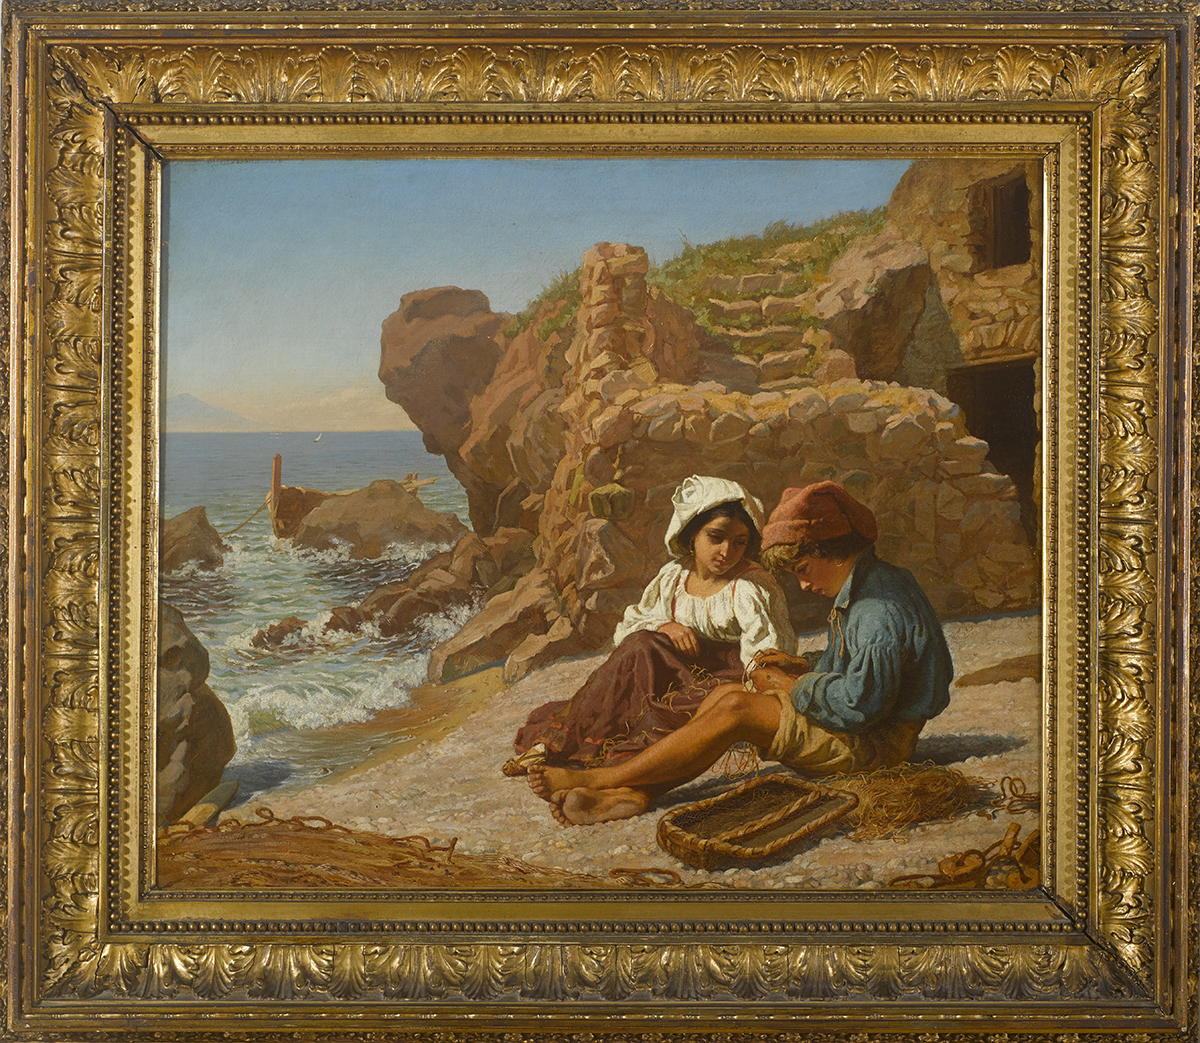 Michael George Brennan (1839-1871) MENDING NETS, c.1860s oil on canvas 17 by 20.50in. (43.2 by 52. - Image 2 of 2